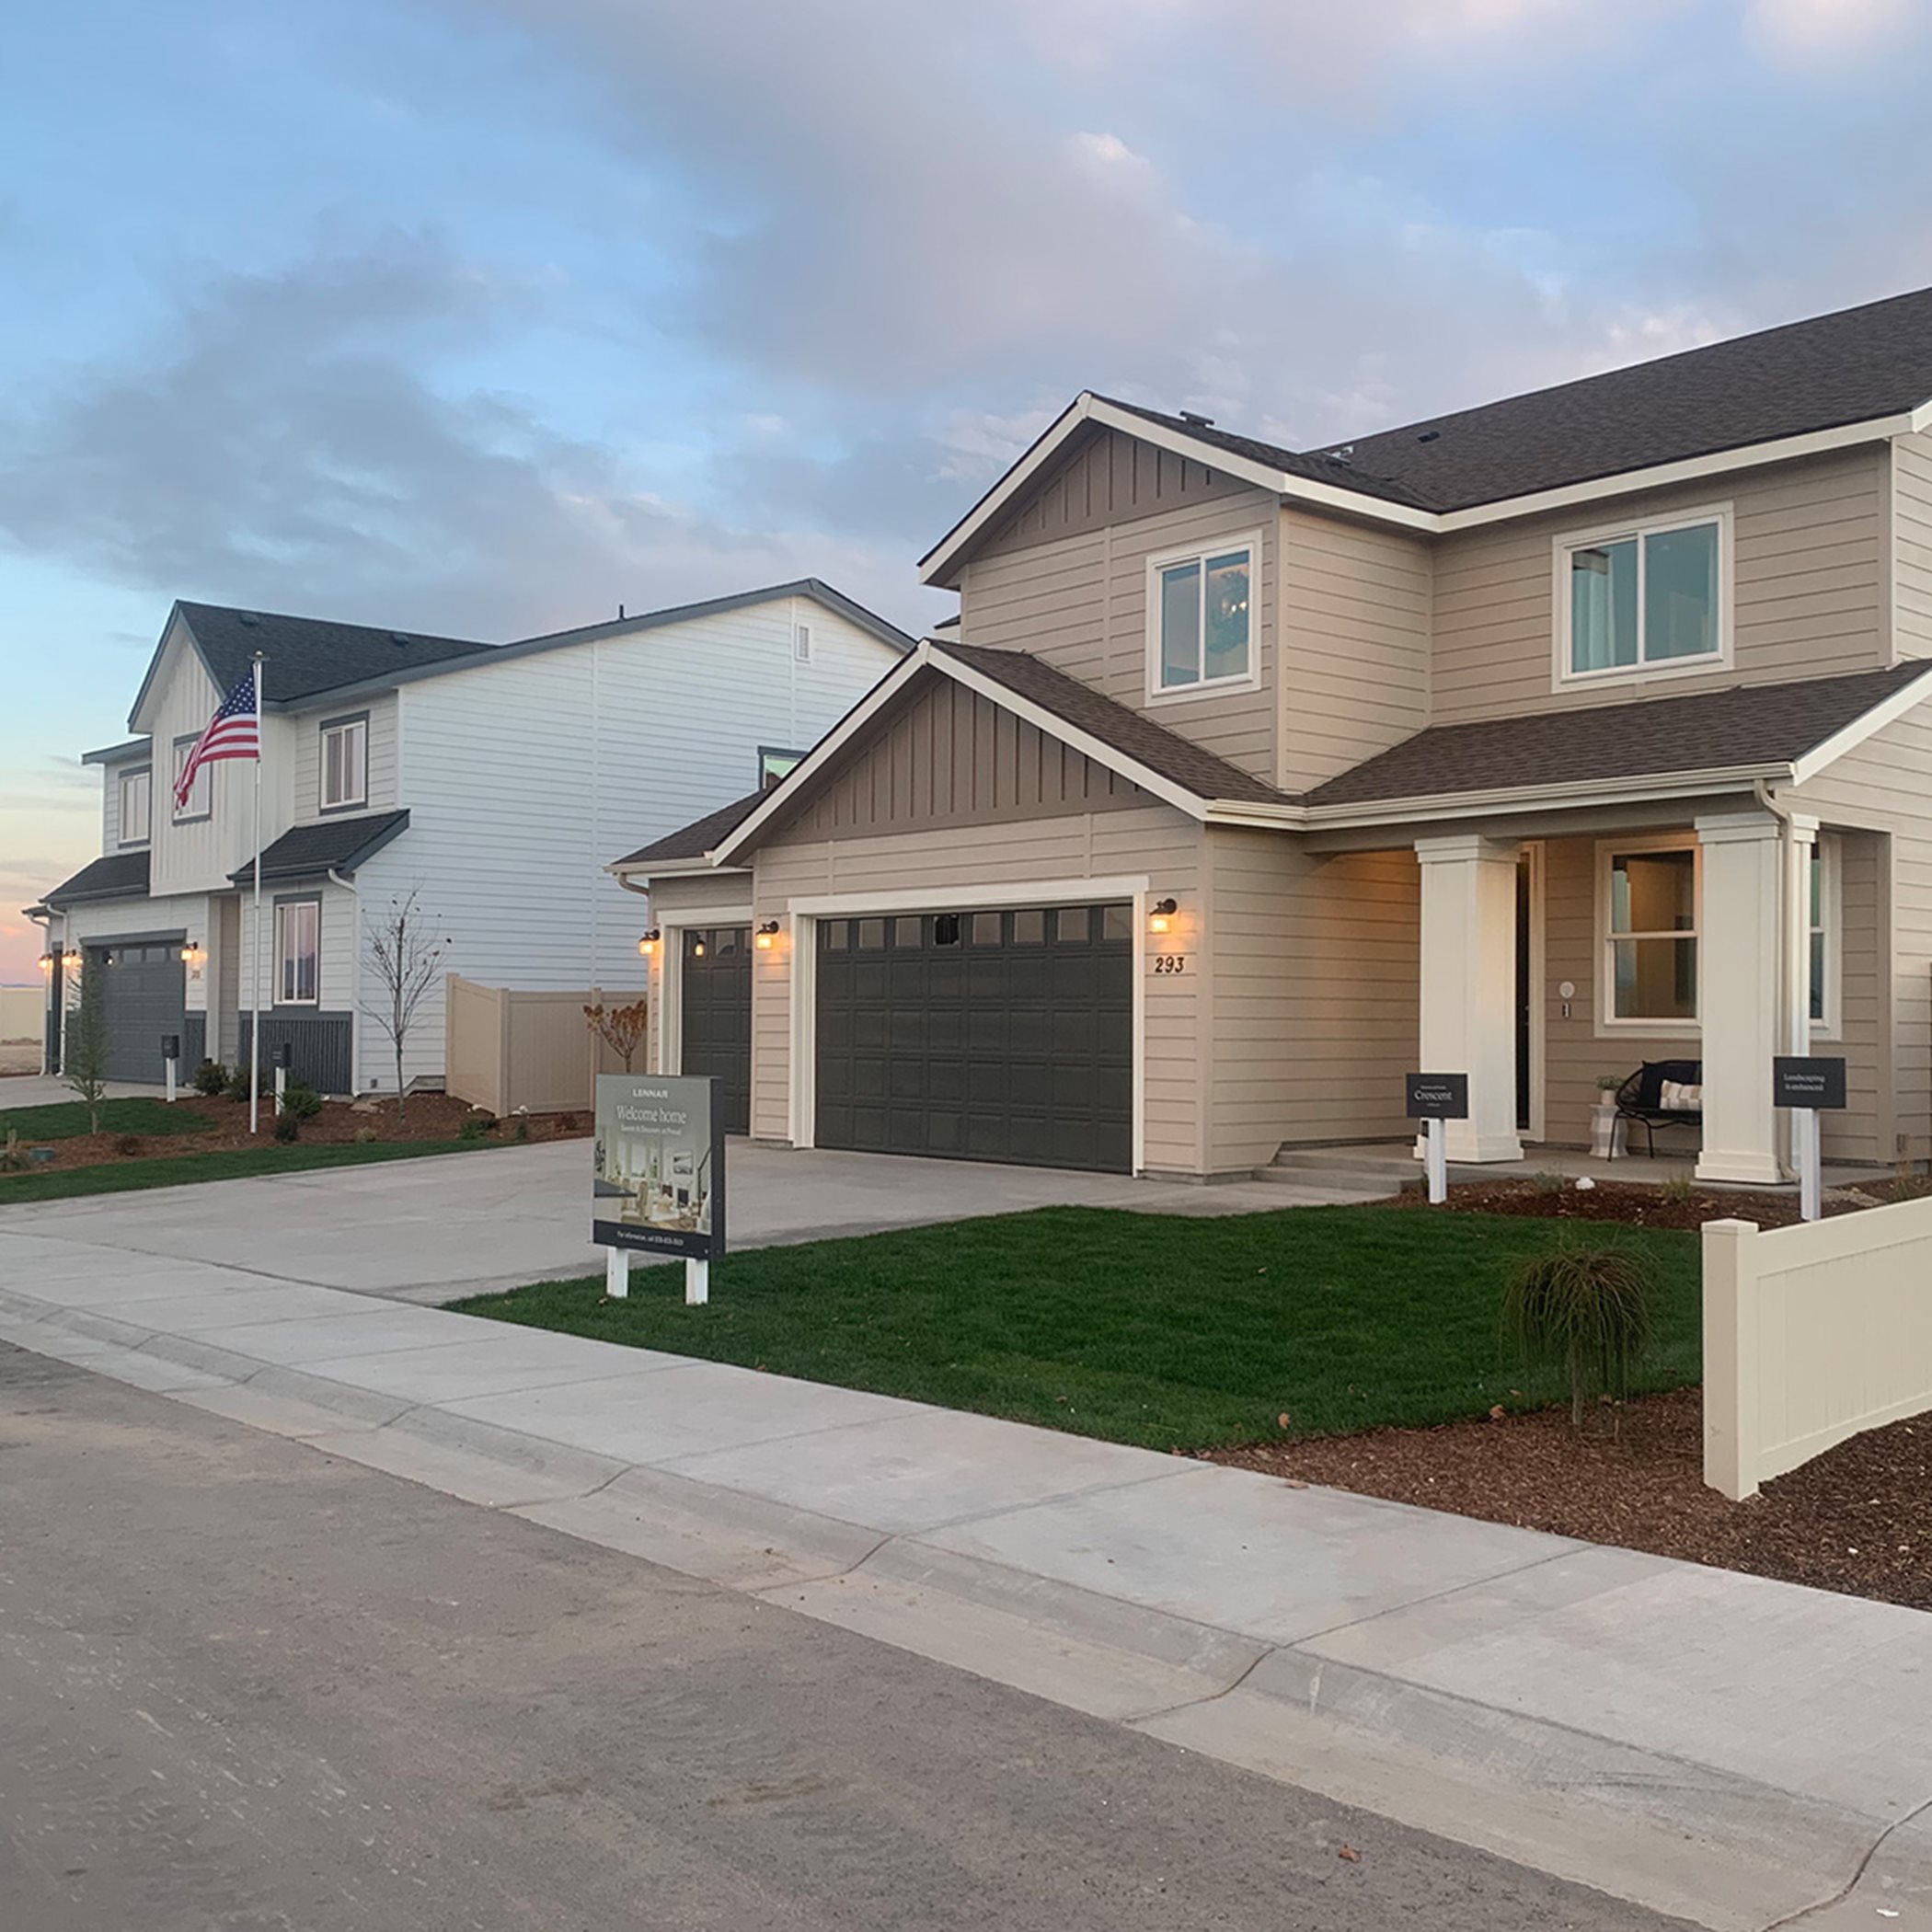 New homes in the Boise area